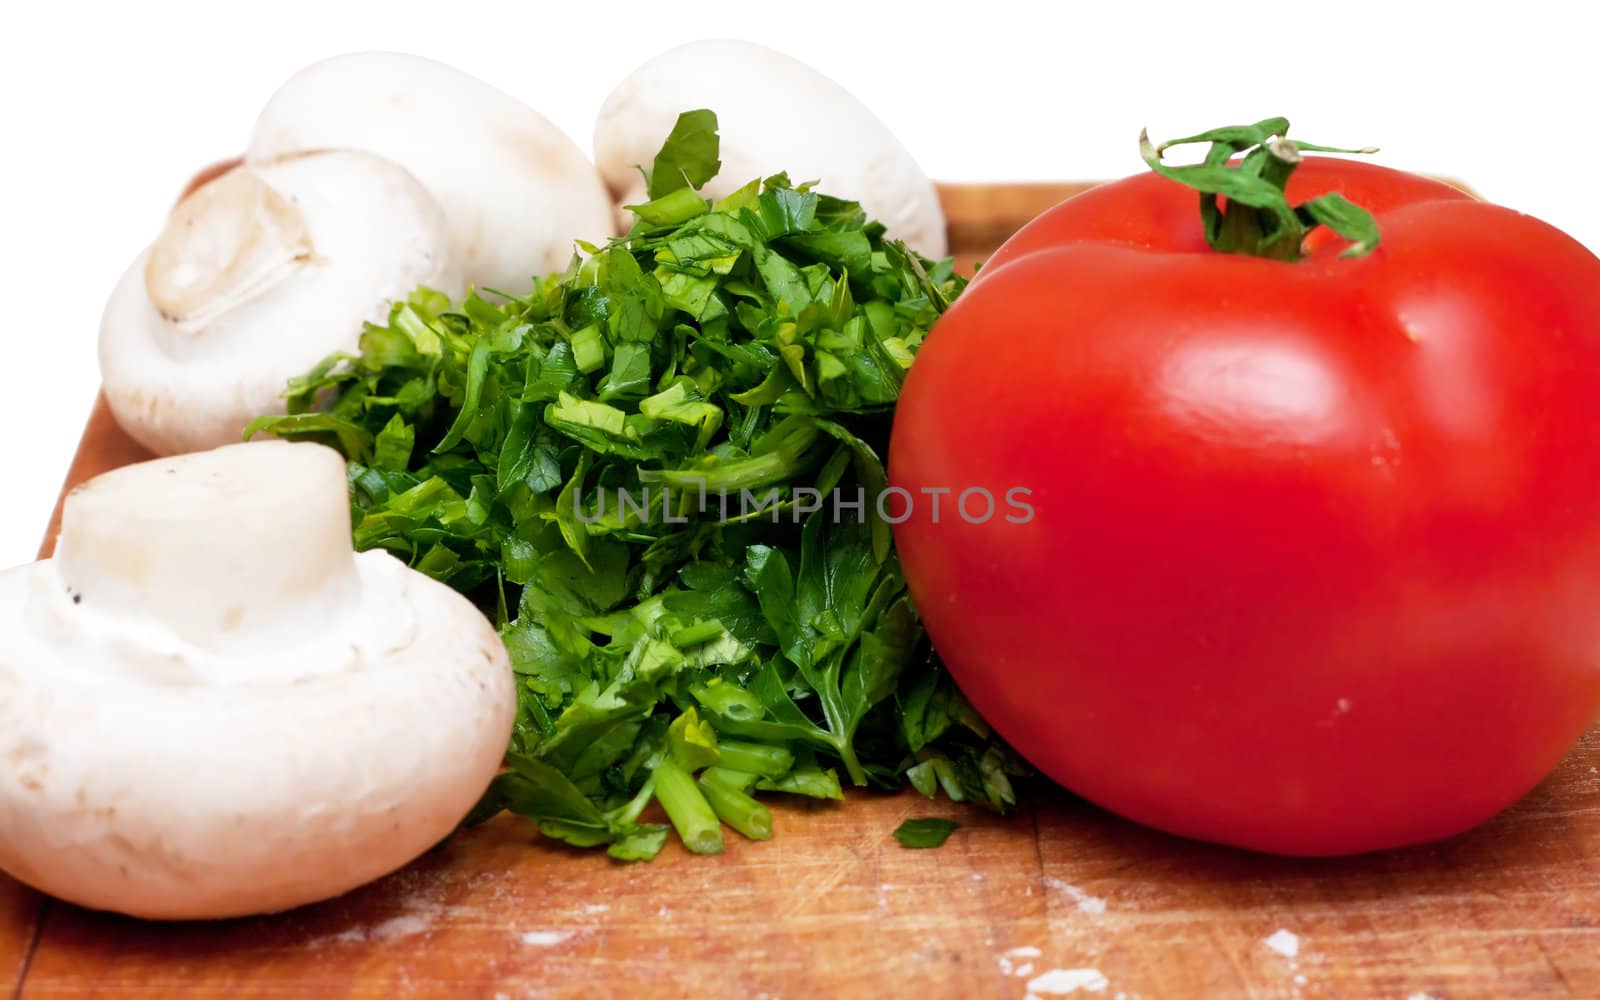 Some ingredients for pizza: parsley, mushrooms, tomatoes.